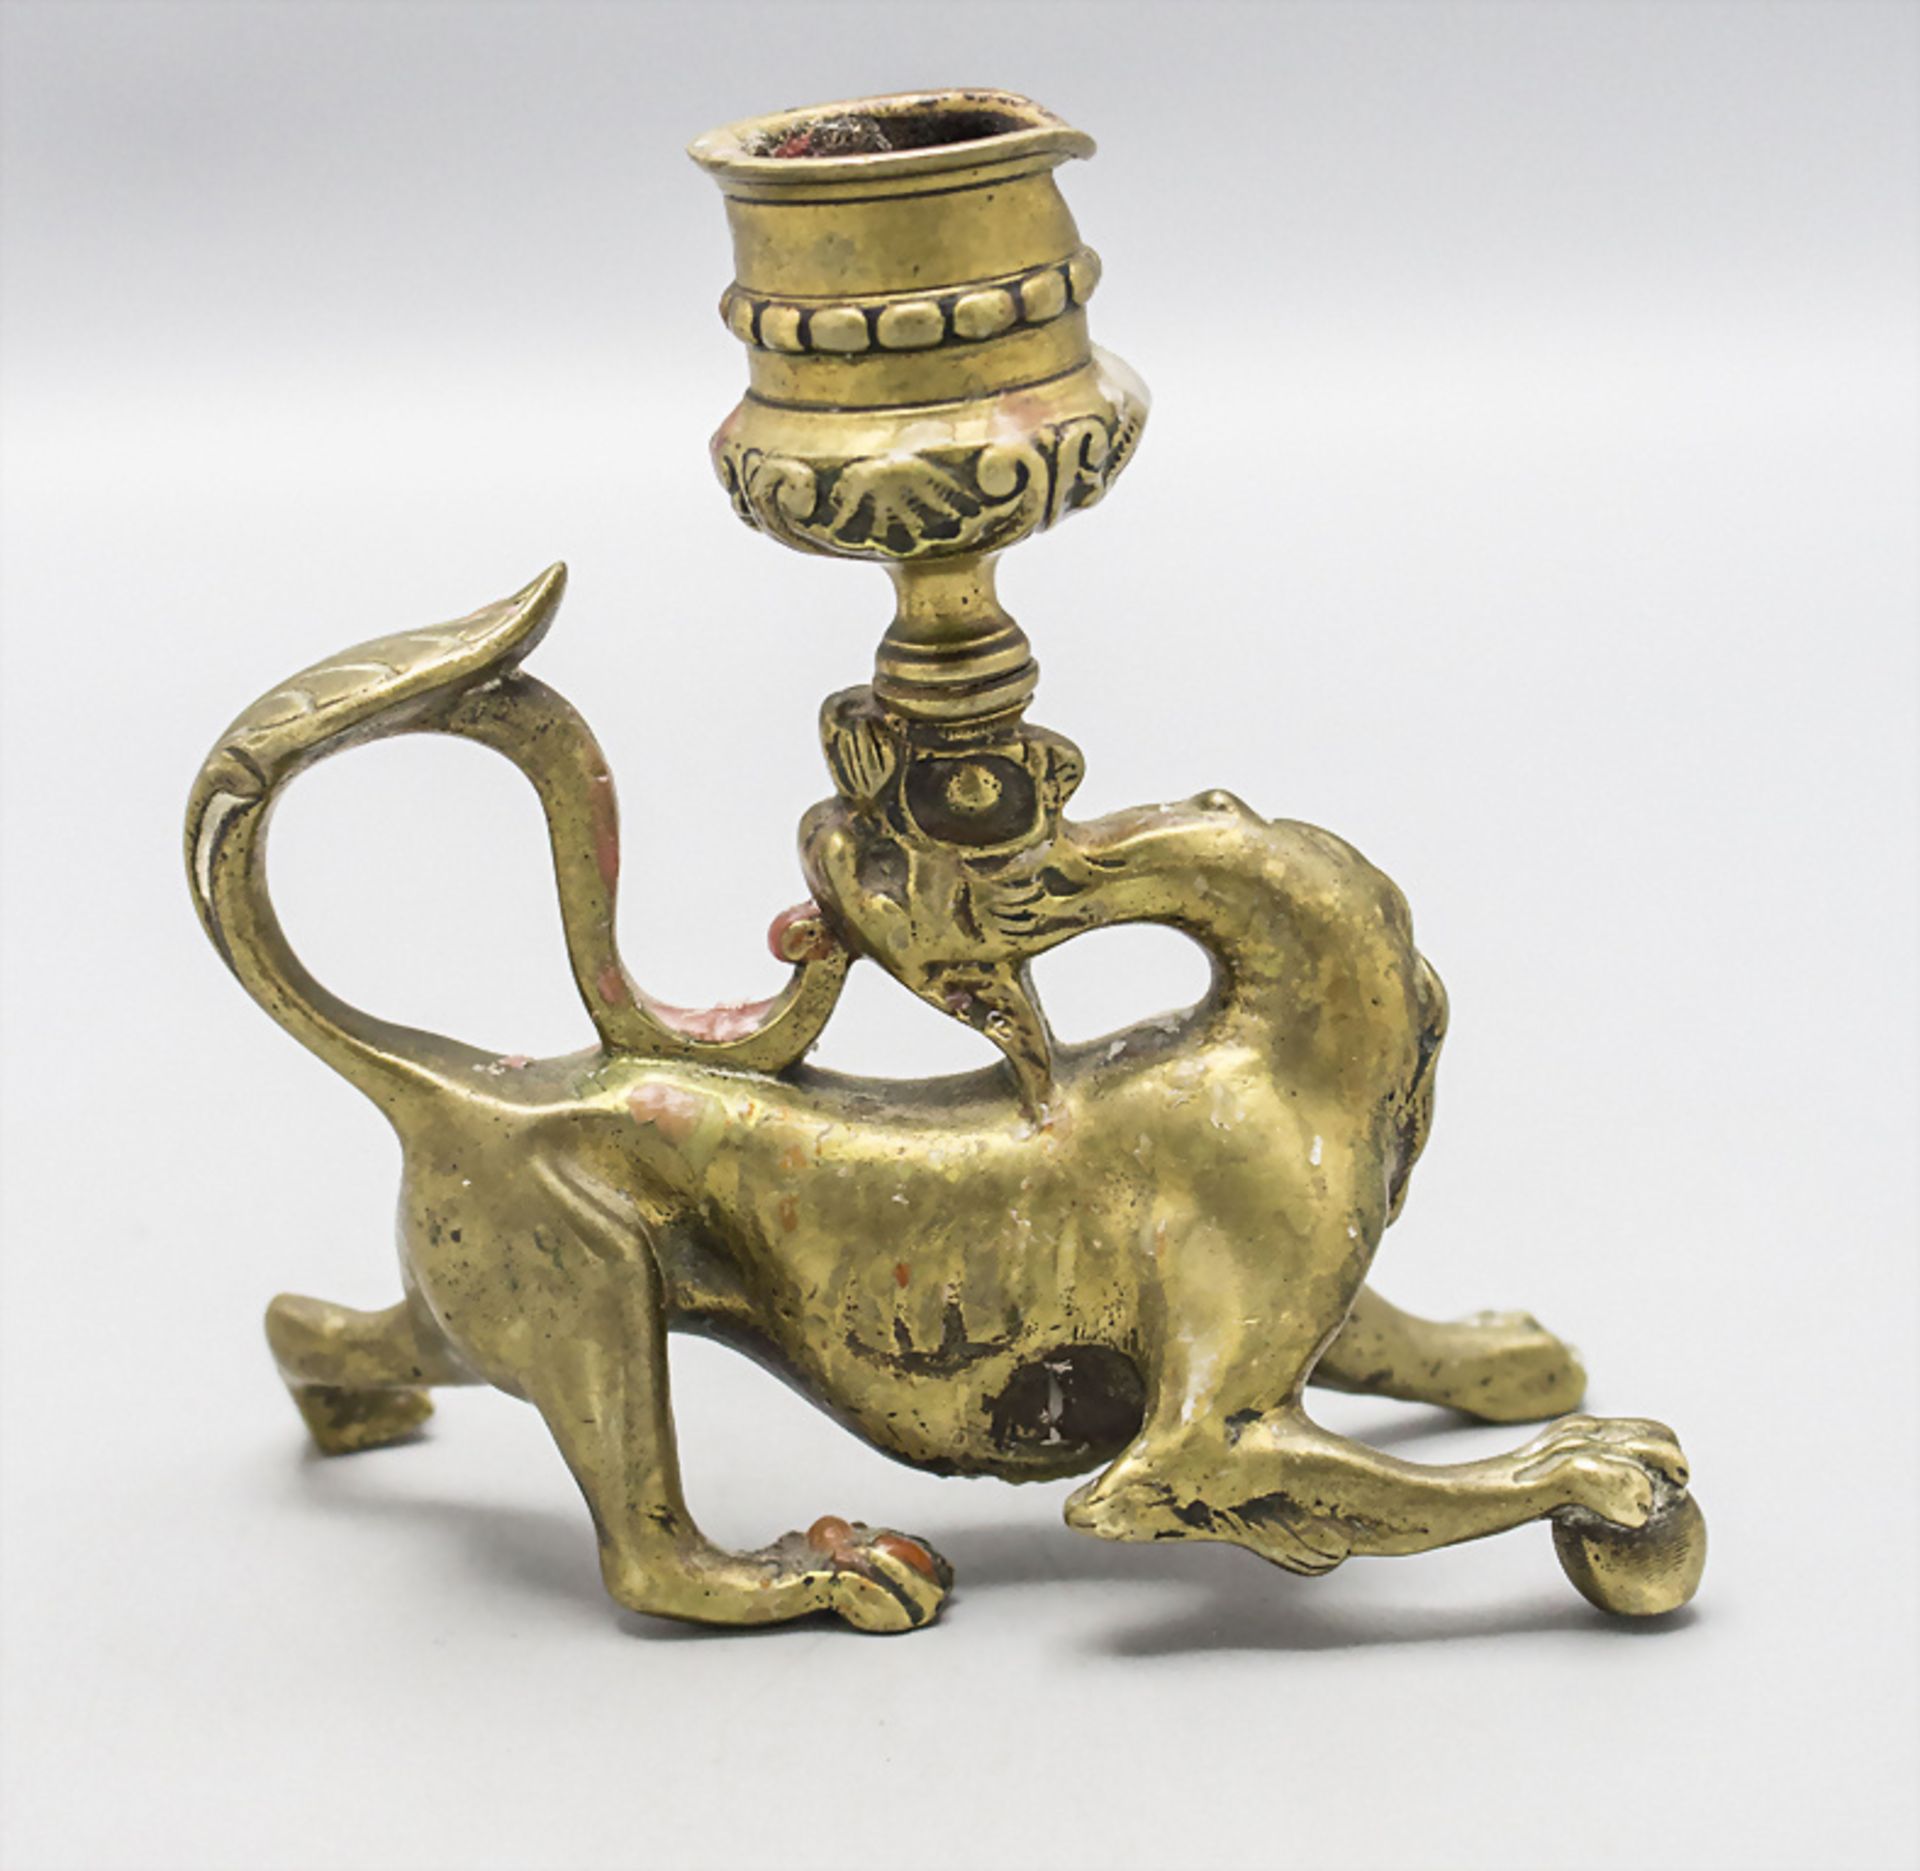 Bronzeleuchter 'Drache' / A bronze candle holder with a dragon, Frankreich, 19. Jh. - Image 2 of 5